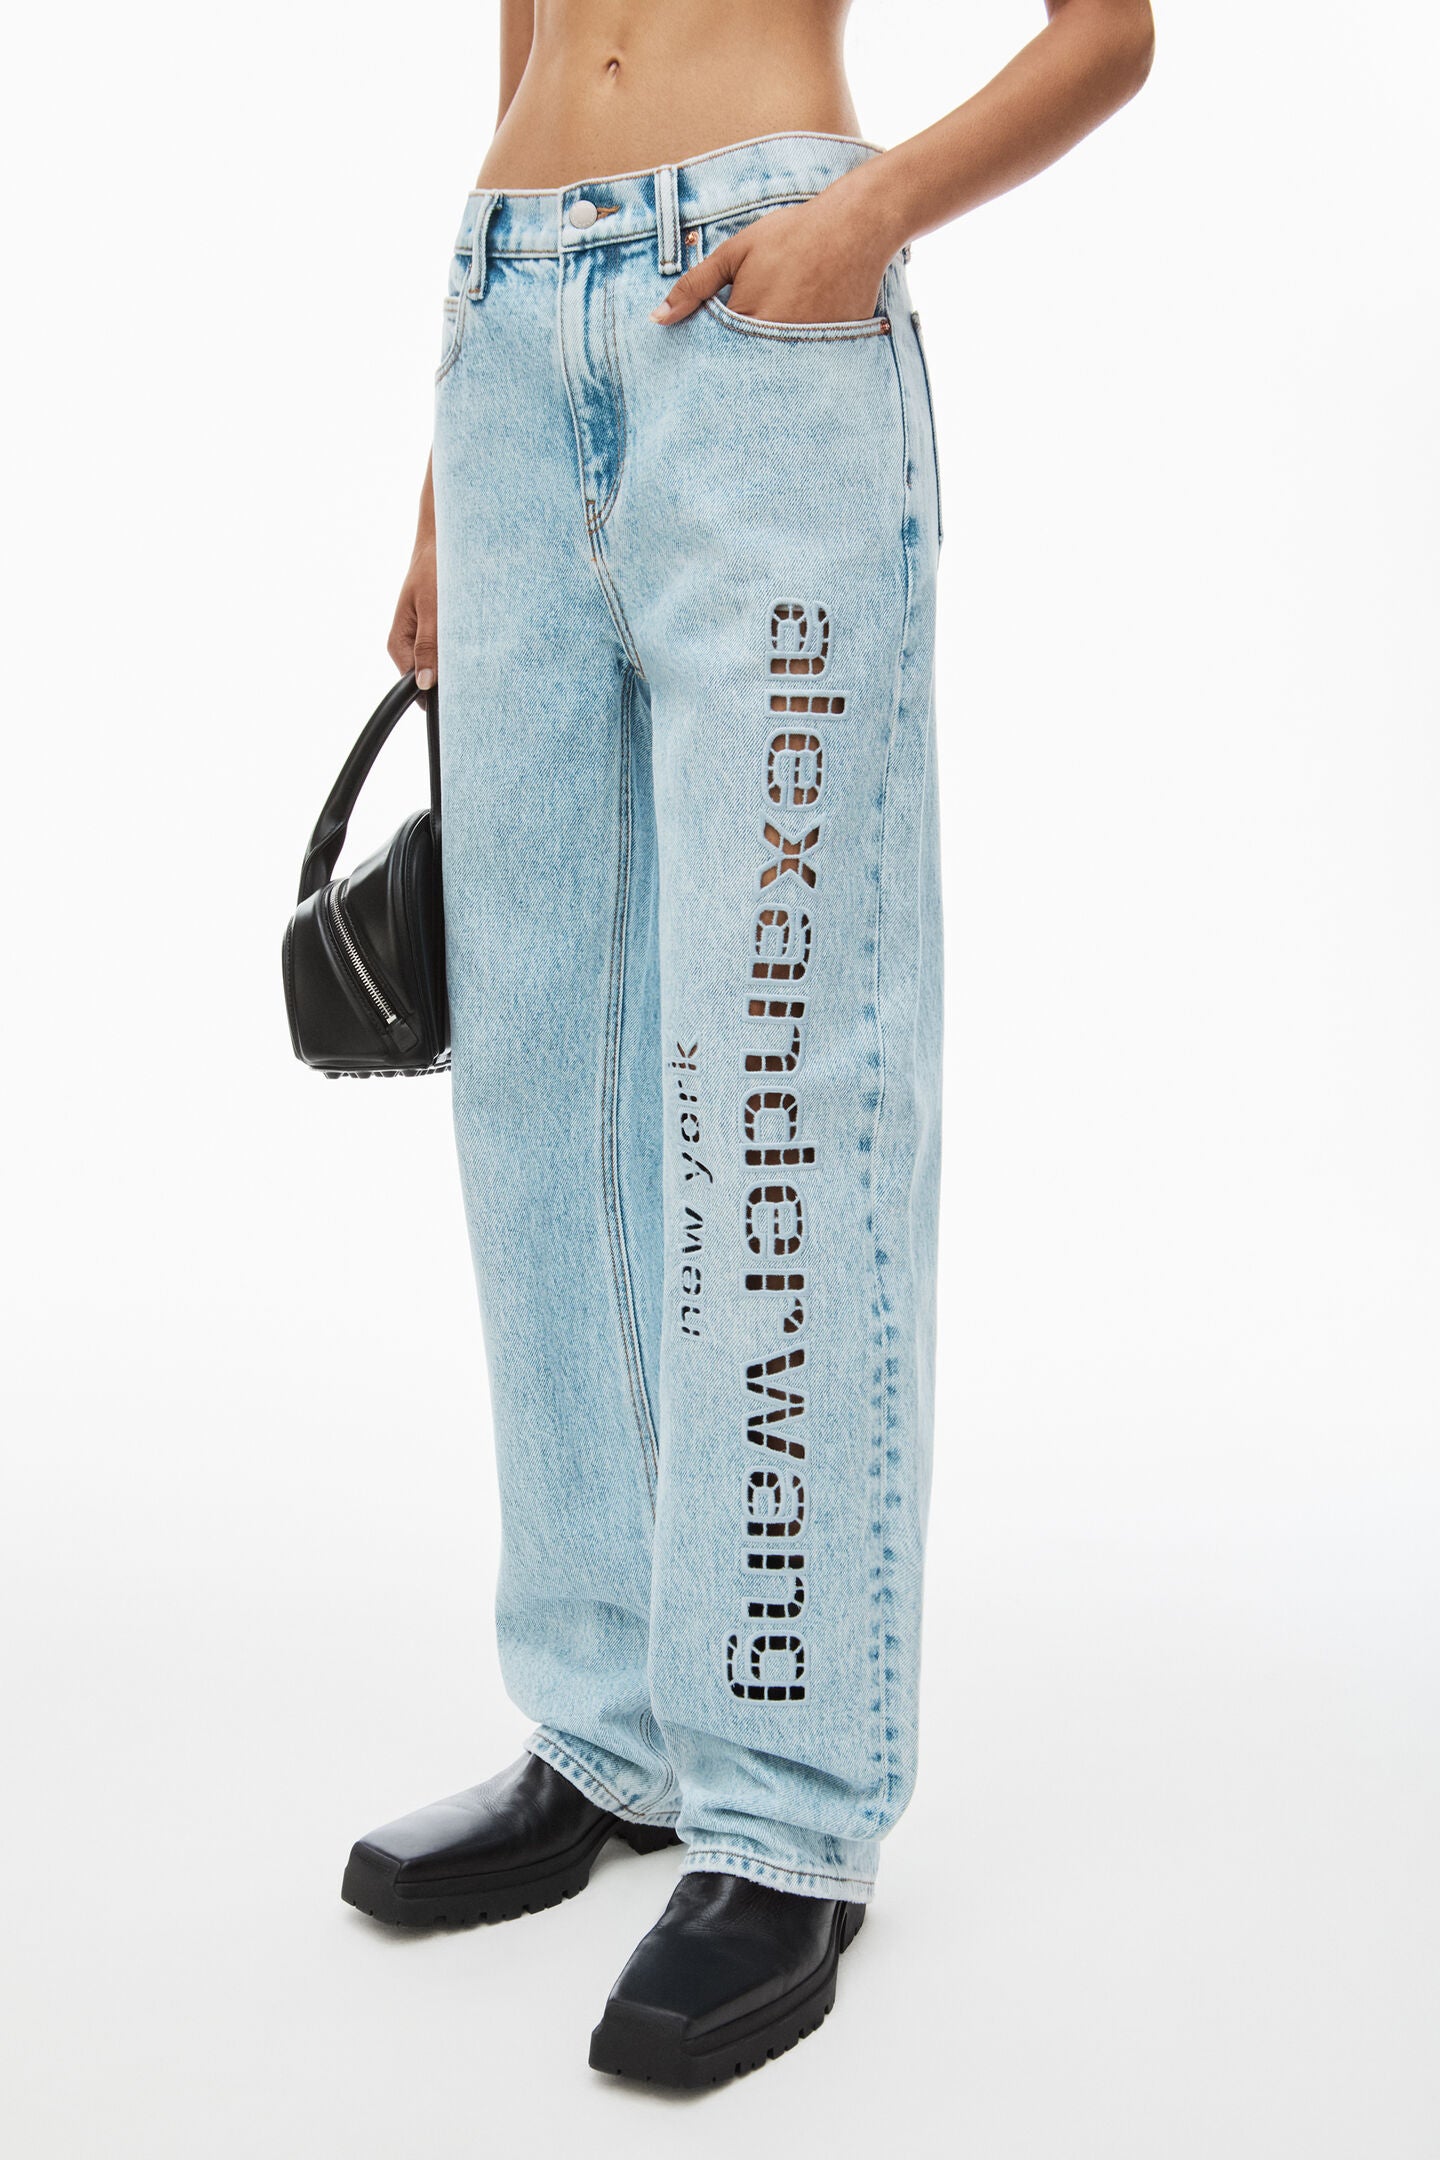 The Alexander Wang EZ Slouch Logo Cut Out Embroidery Jean in Bleach available at The New Trend Australia